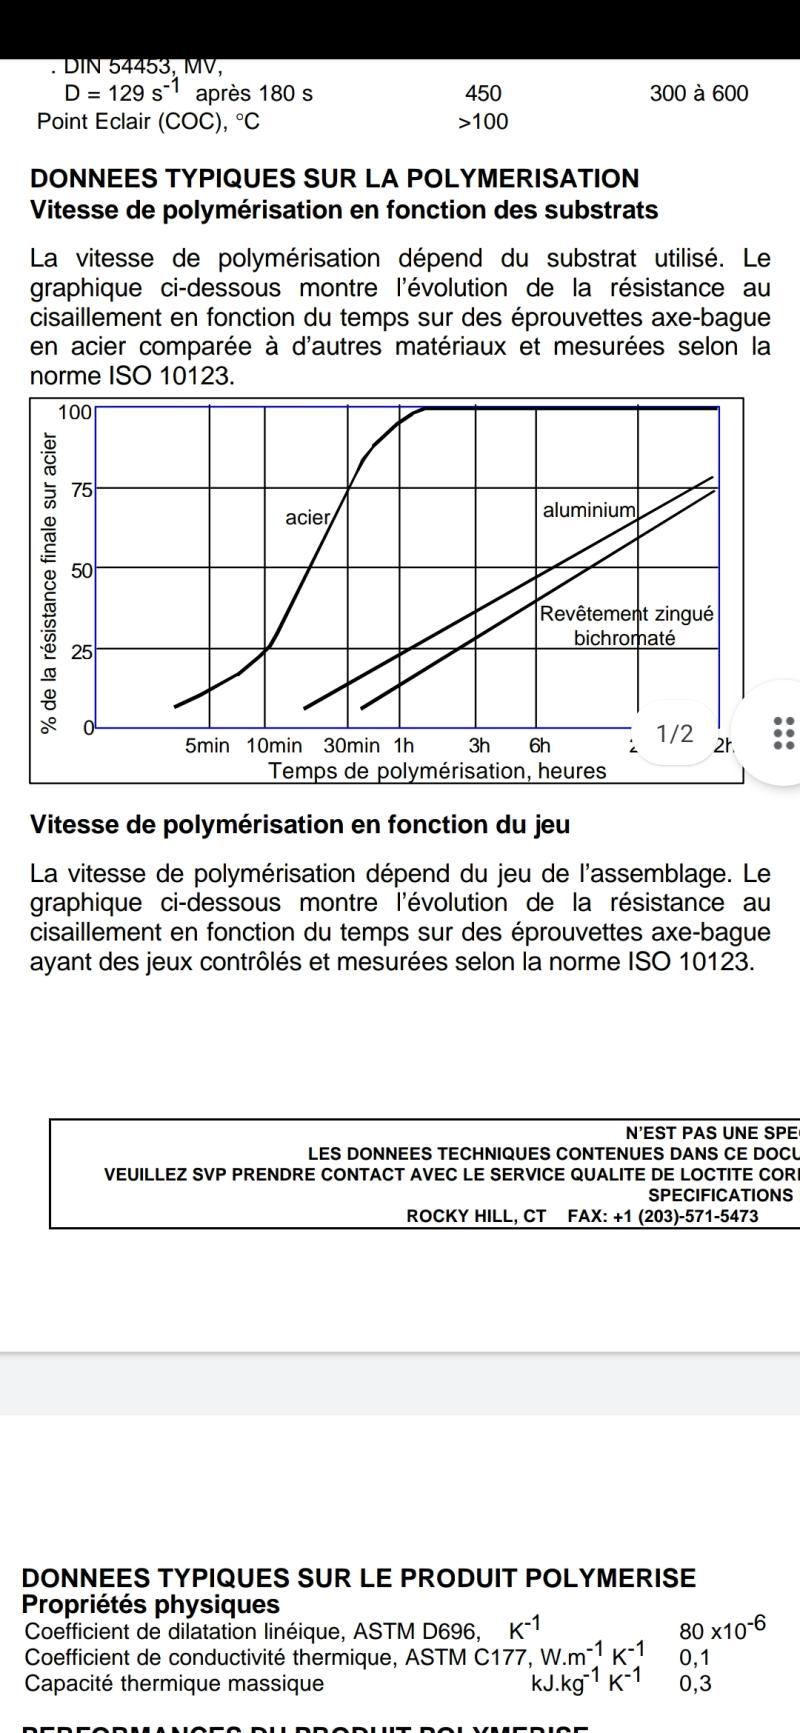 roulements betonniere - Page 4 1cy5pn